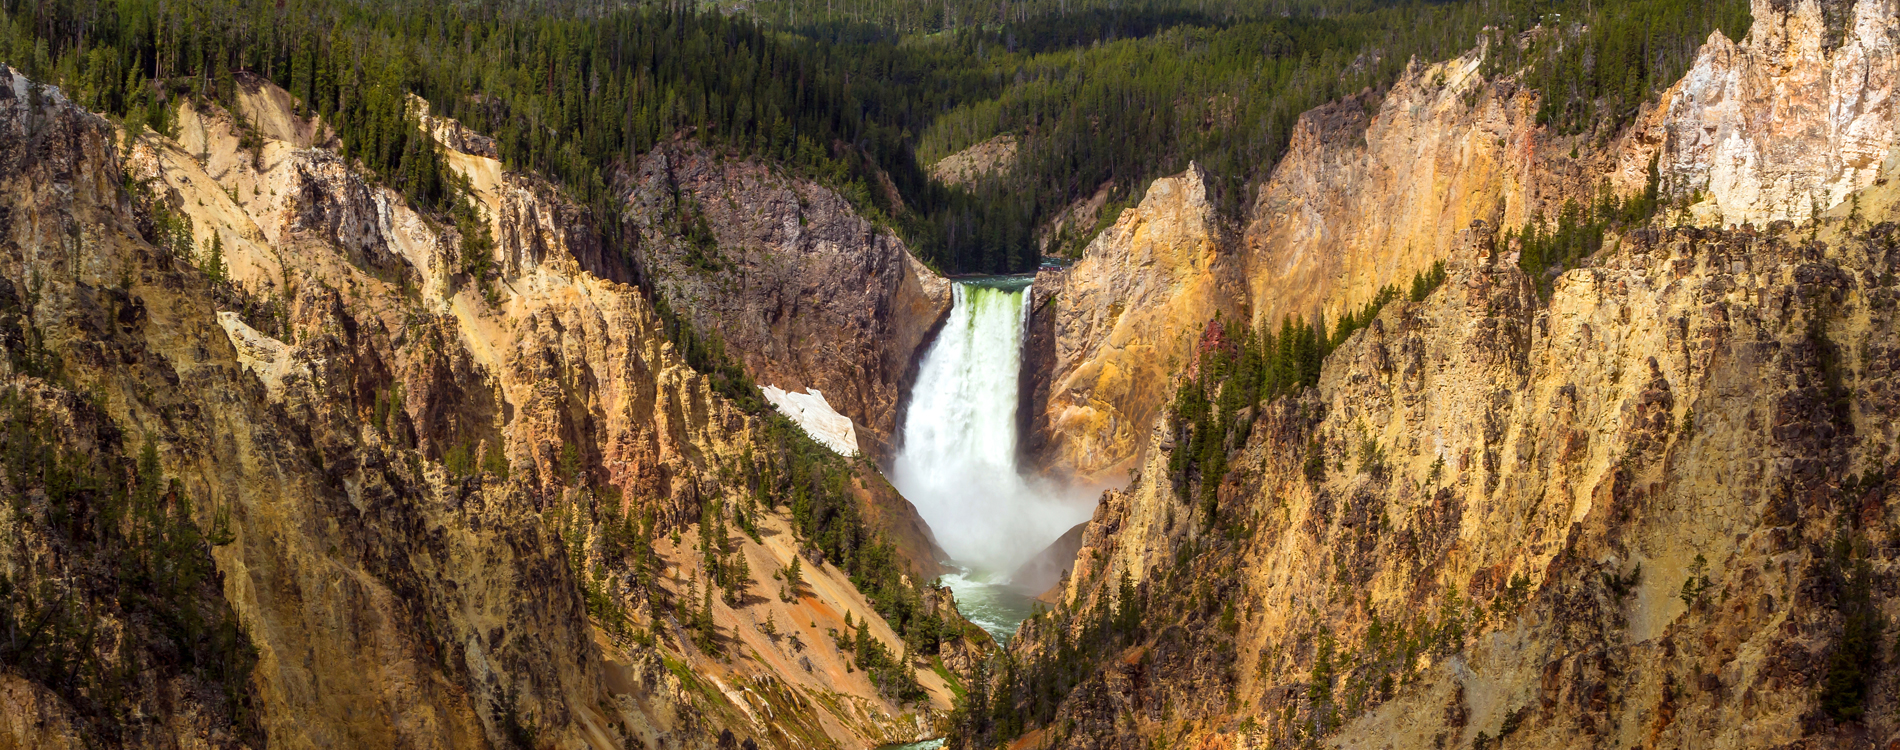 West Yellowstone - Grand Canyon of the Yellowstone River